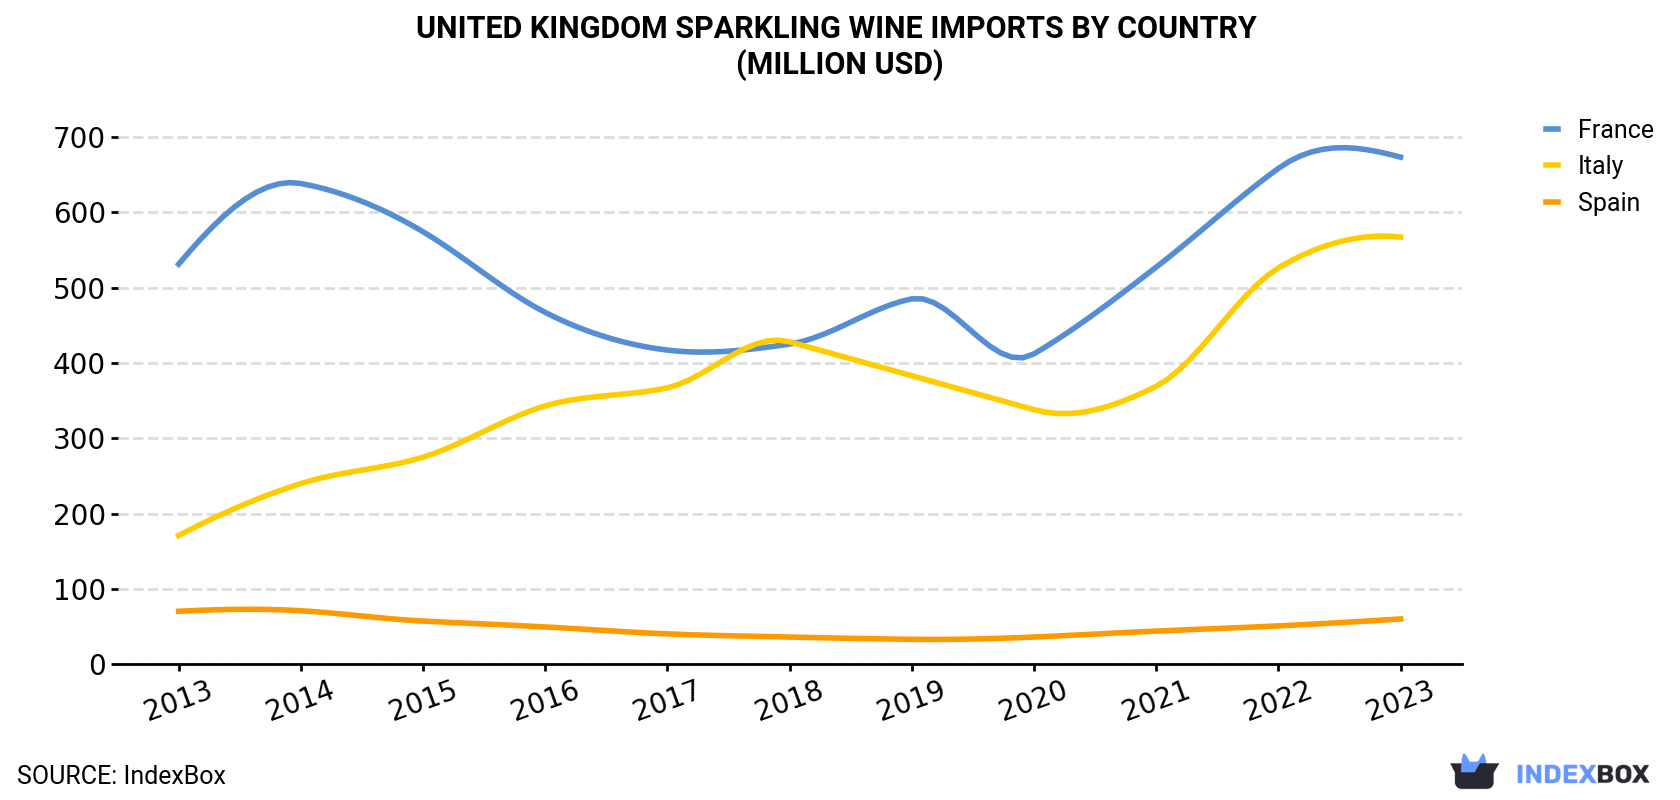 United Kingdom Sparkling Wine Imports By Country (Million USD)